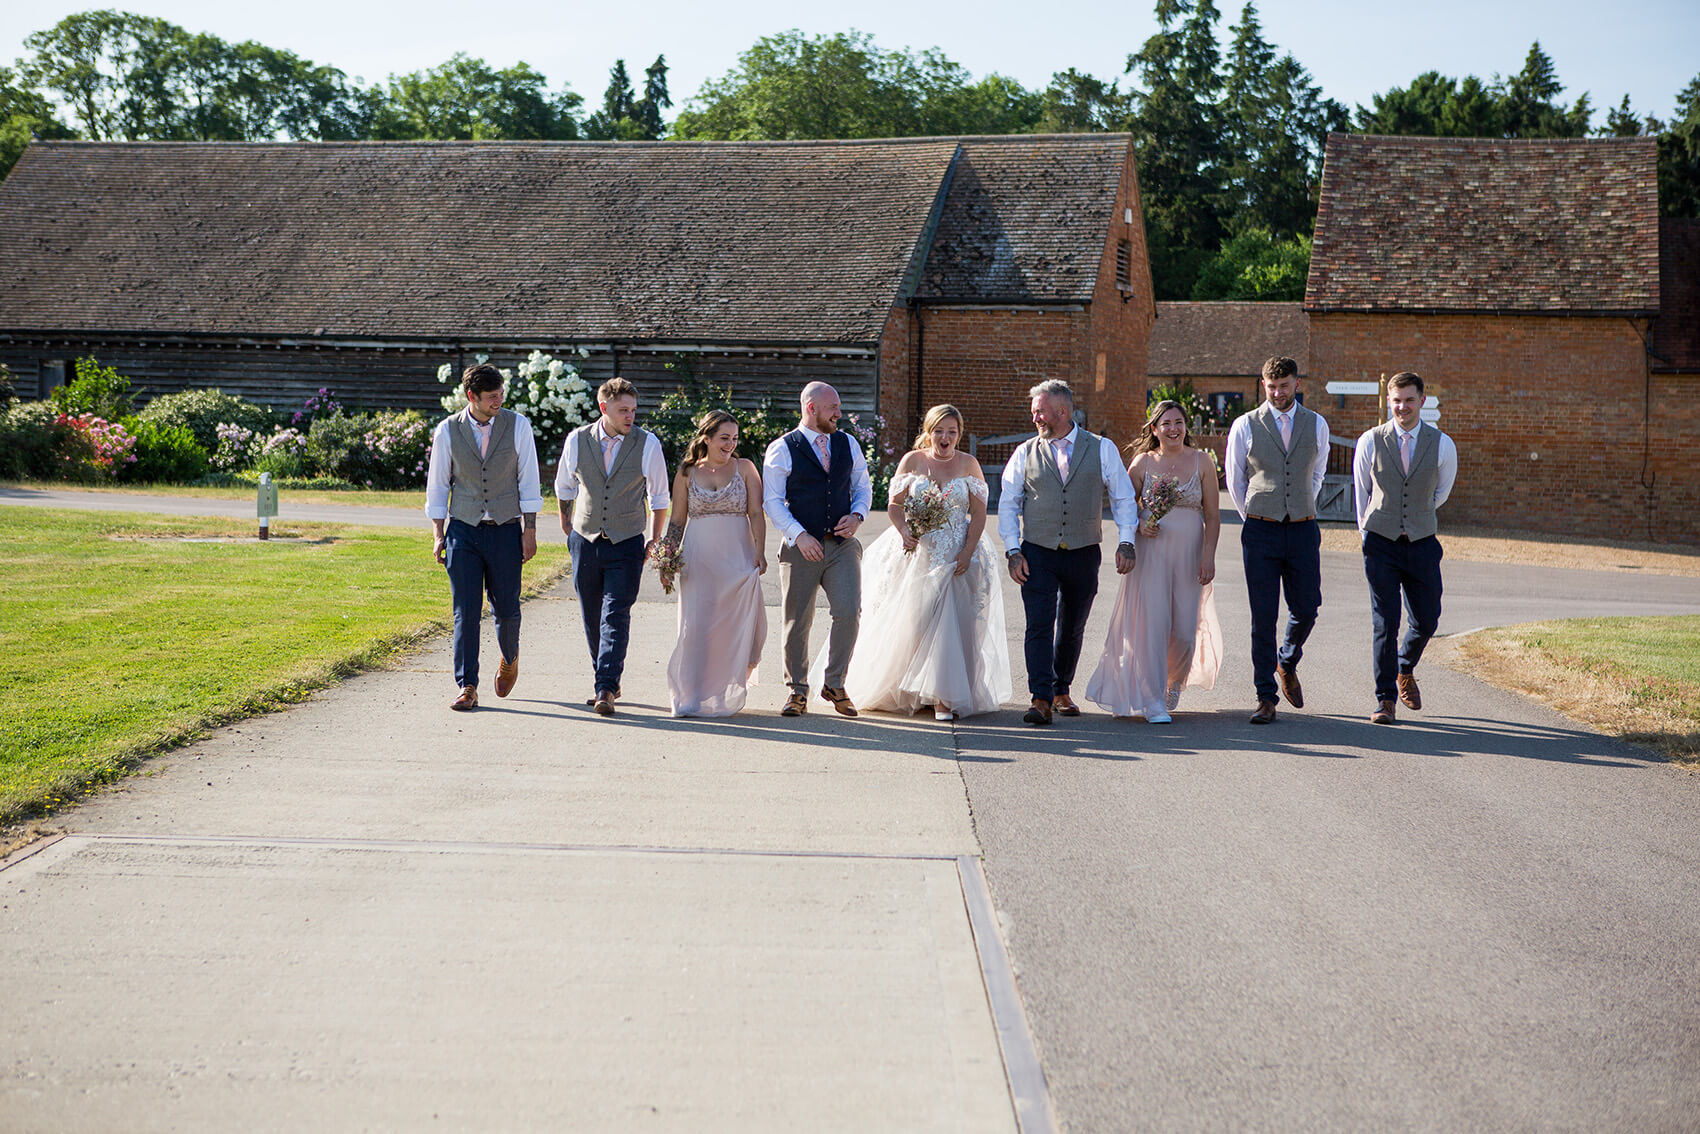 Wedding party walking together